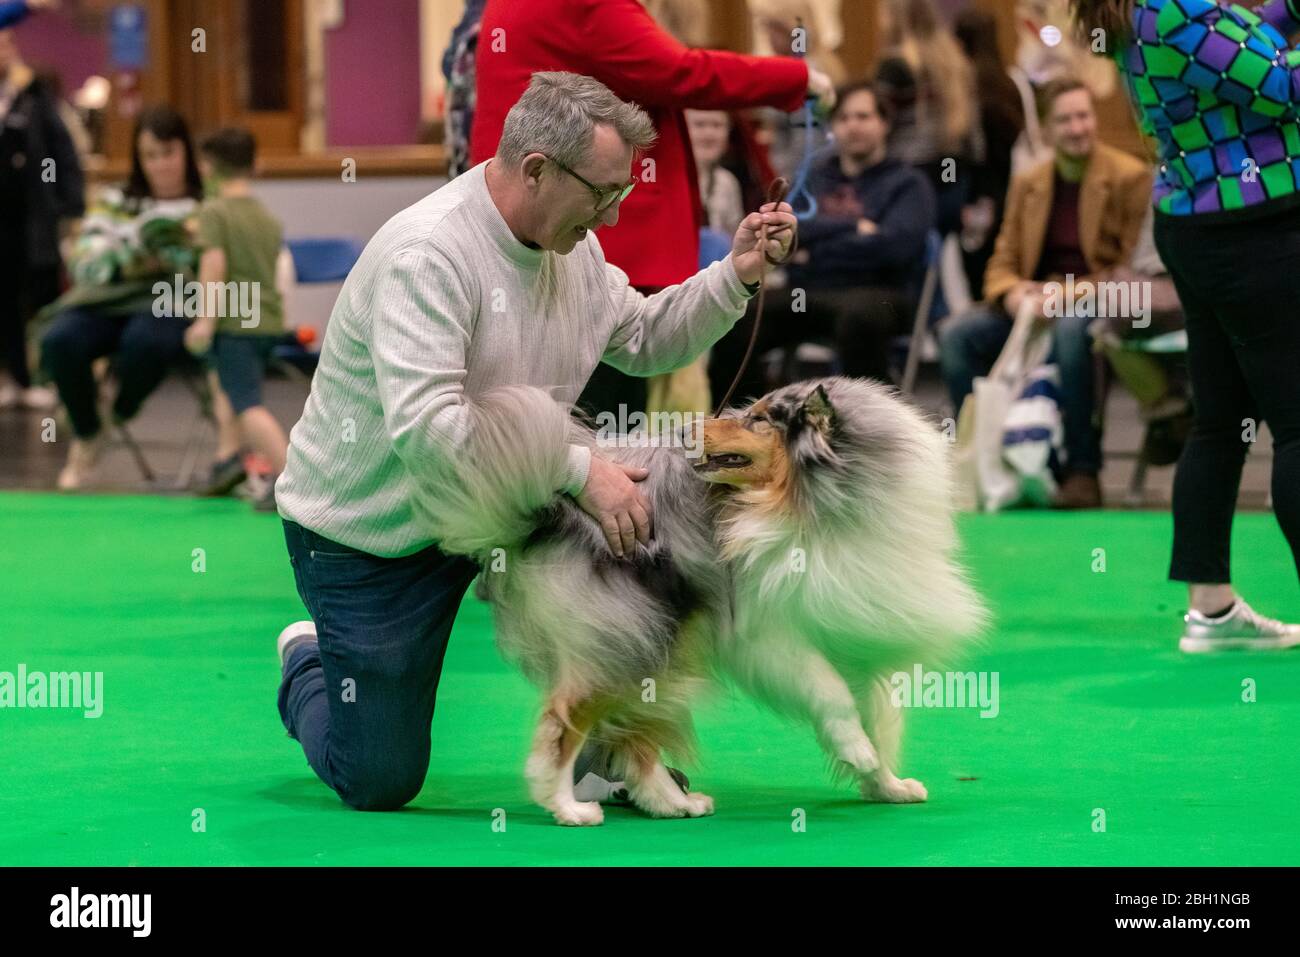 Crufts 2020: Day 3 of the Crufts dog show at the NEC in Birmingham, UK. Stock Photo